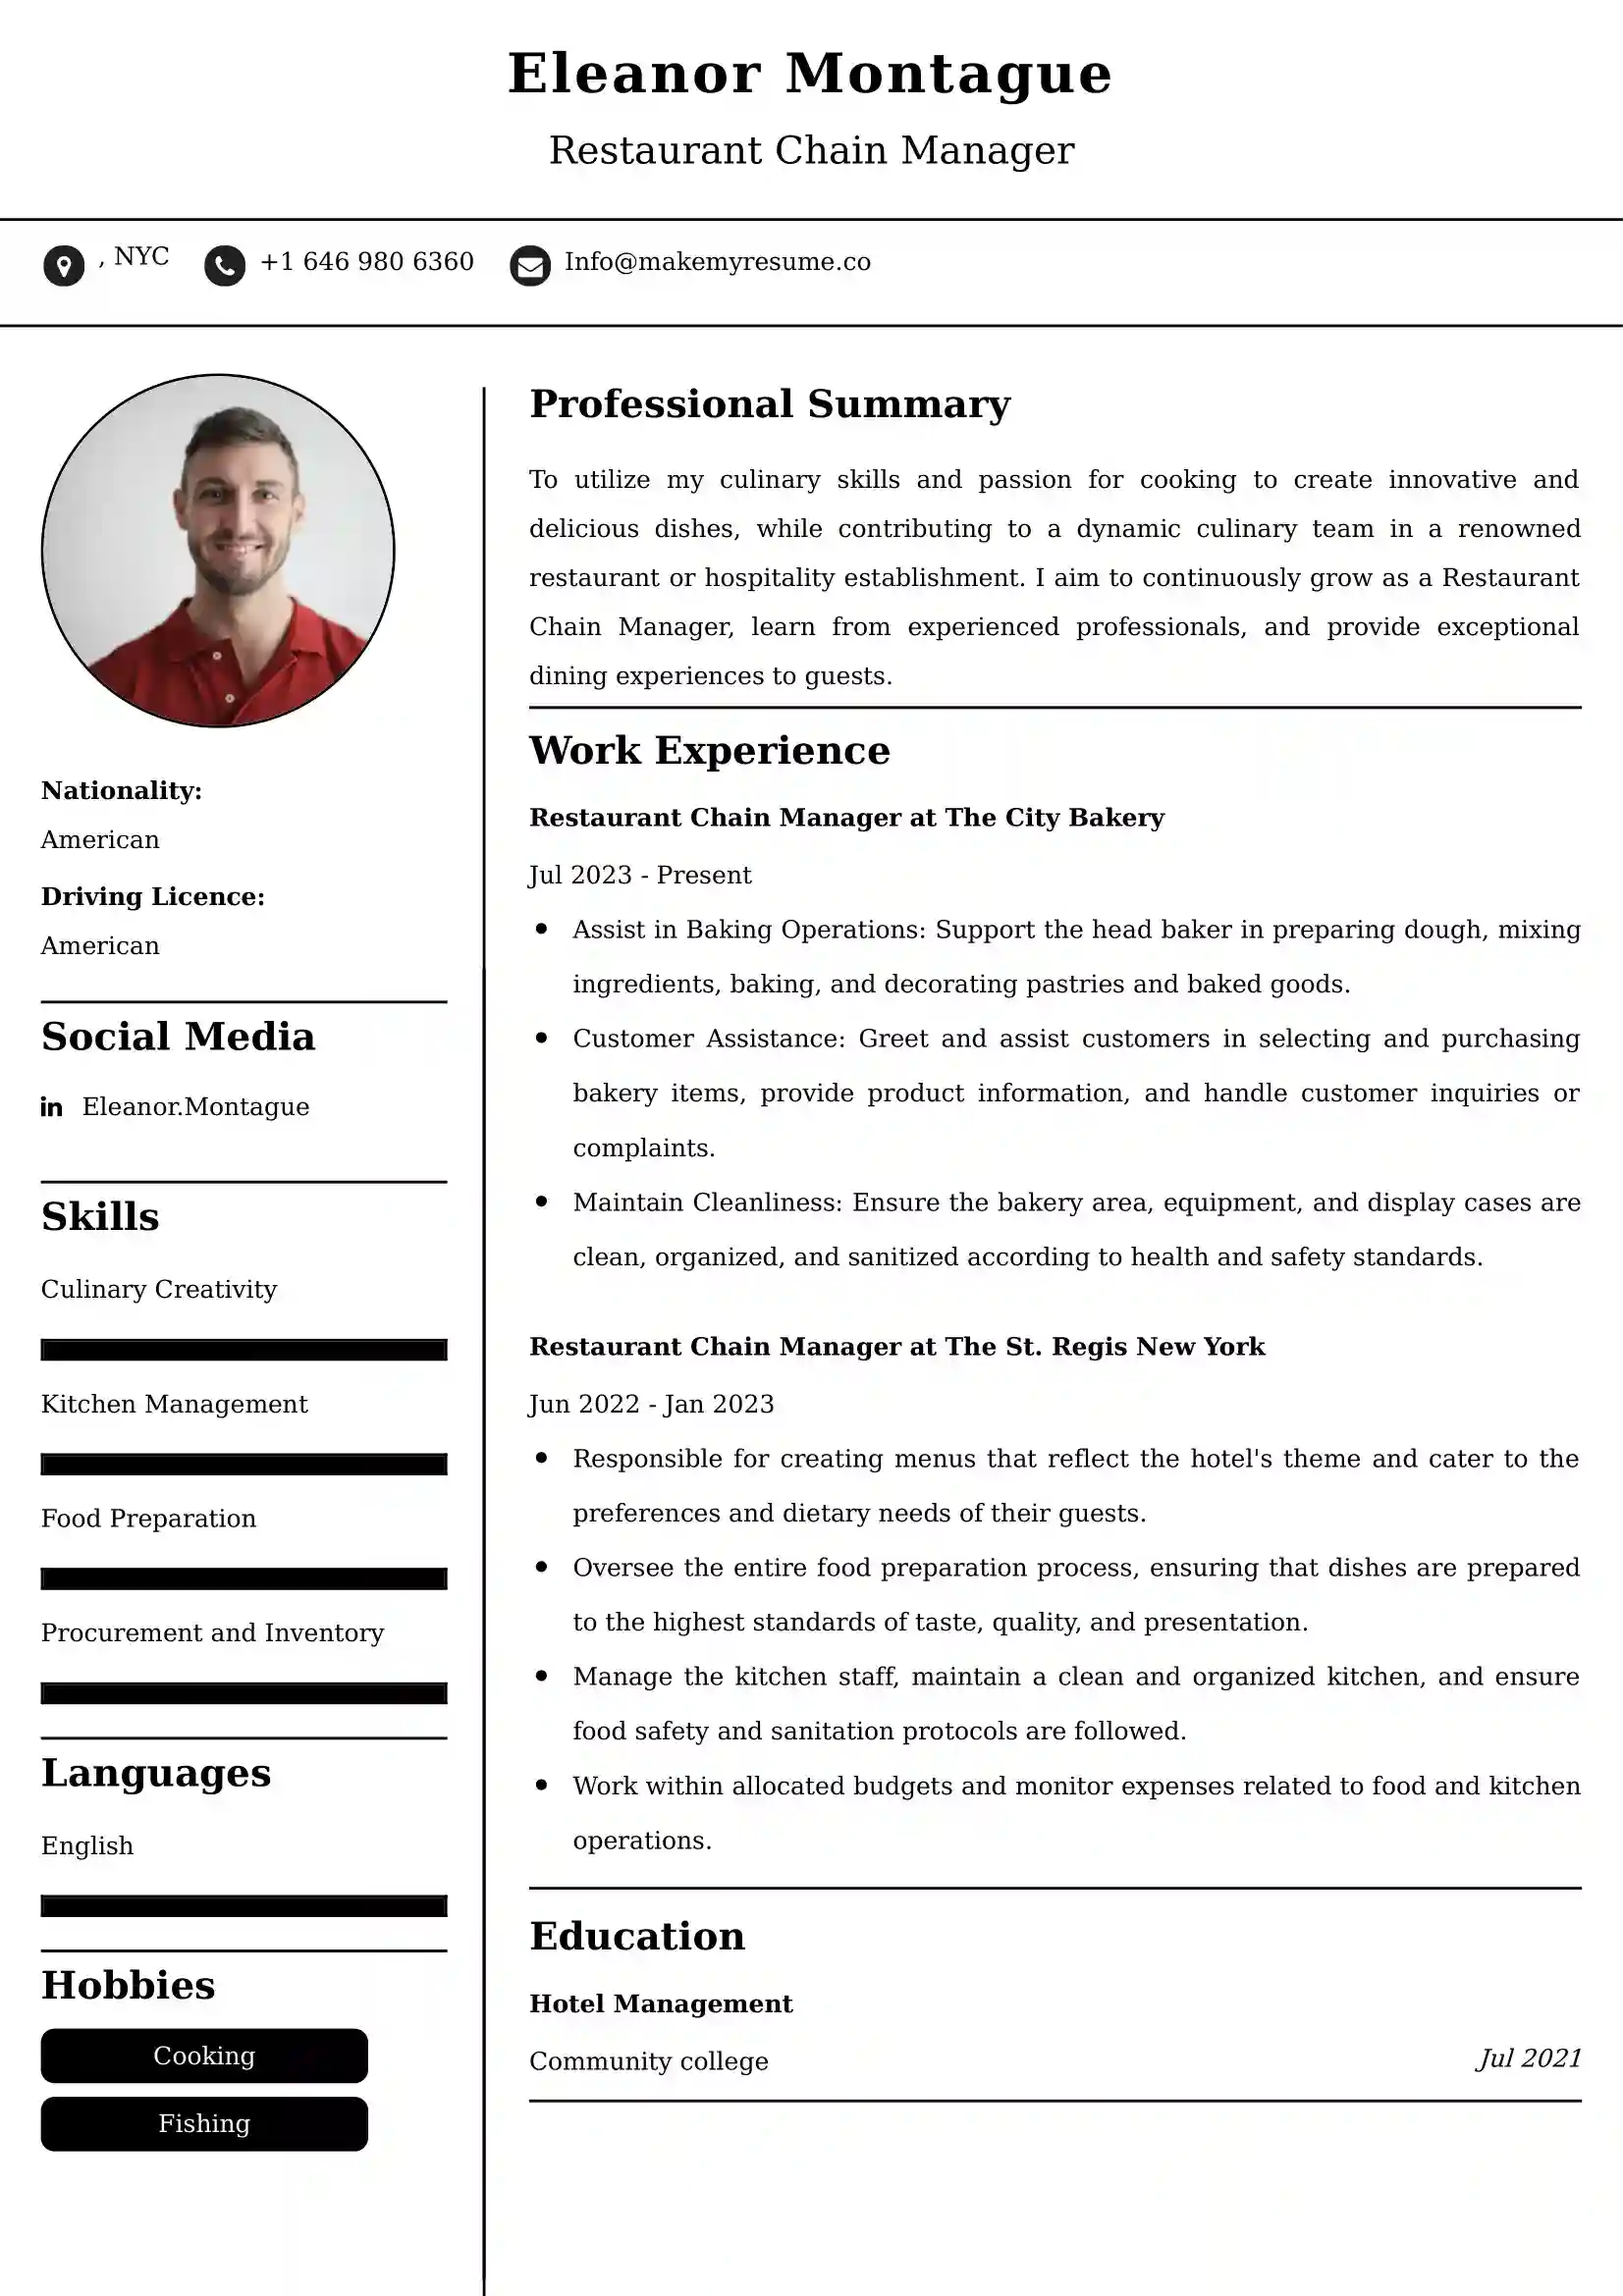 Restaurant Chain Manager Resume Examples - Brazilian Format, Latest Template